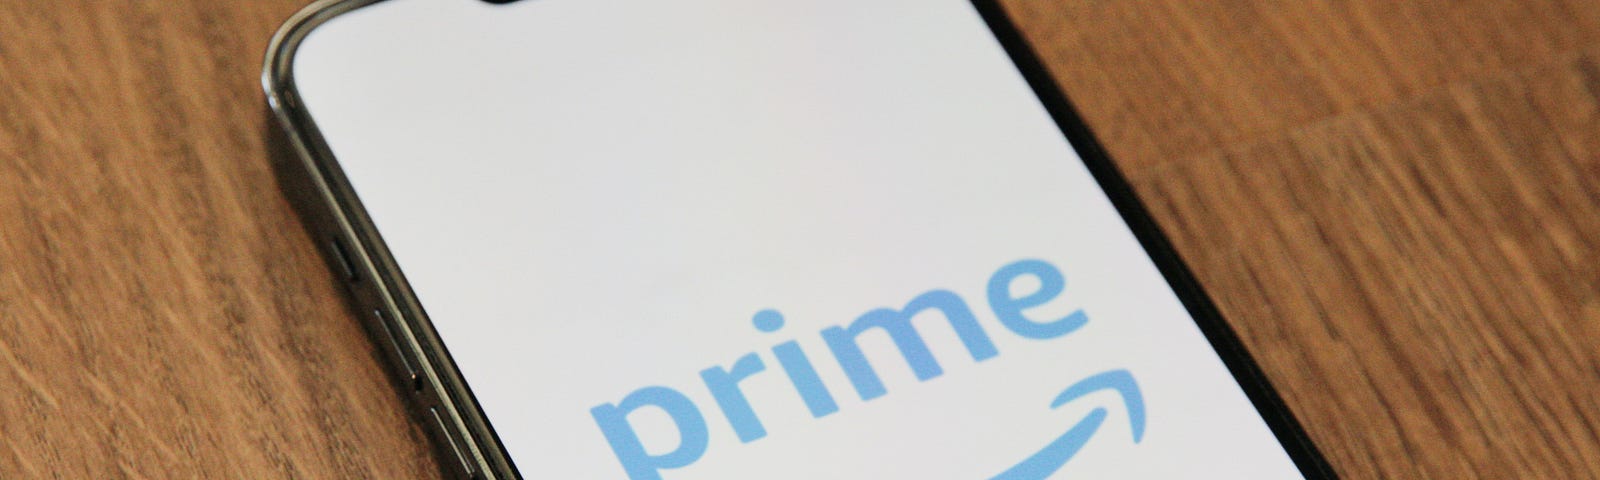 IMAGE: A smartphone on a table with the Amazon Prime logo in blue on a white screen